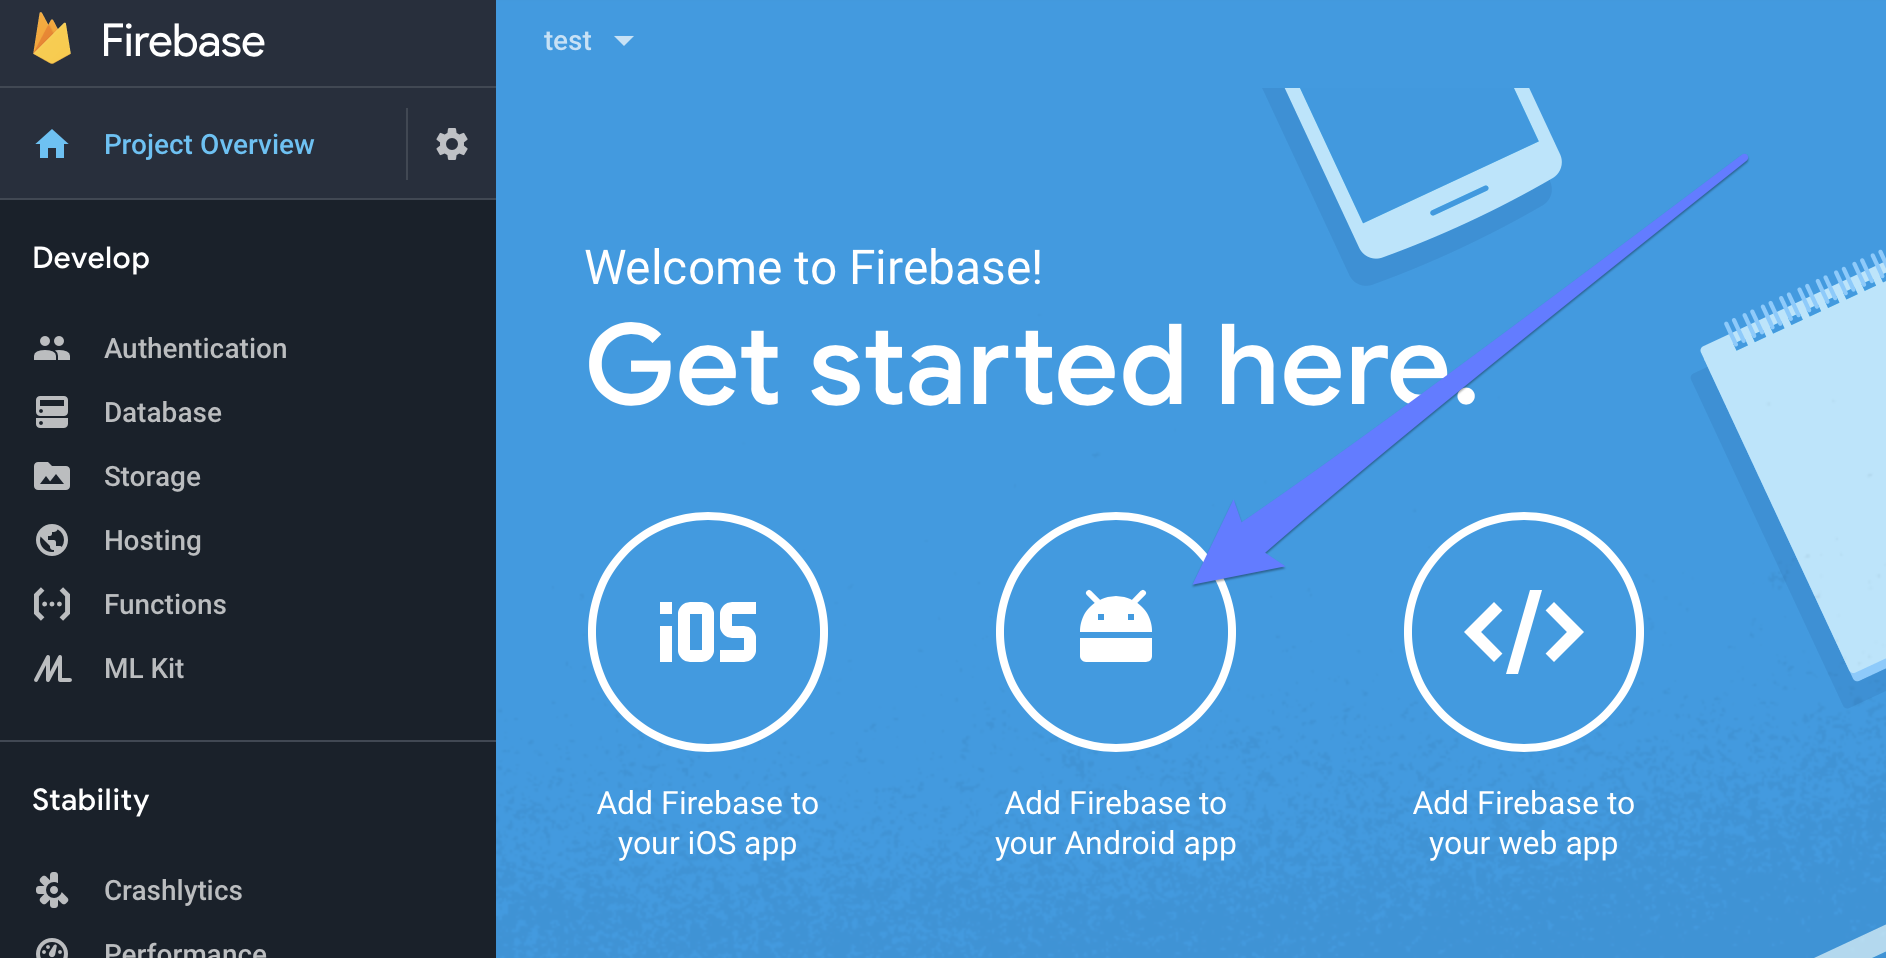 Getting Started screen on Firebase